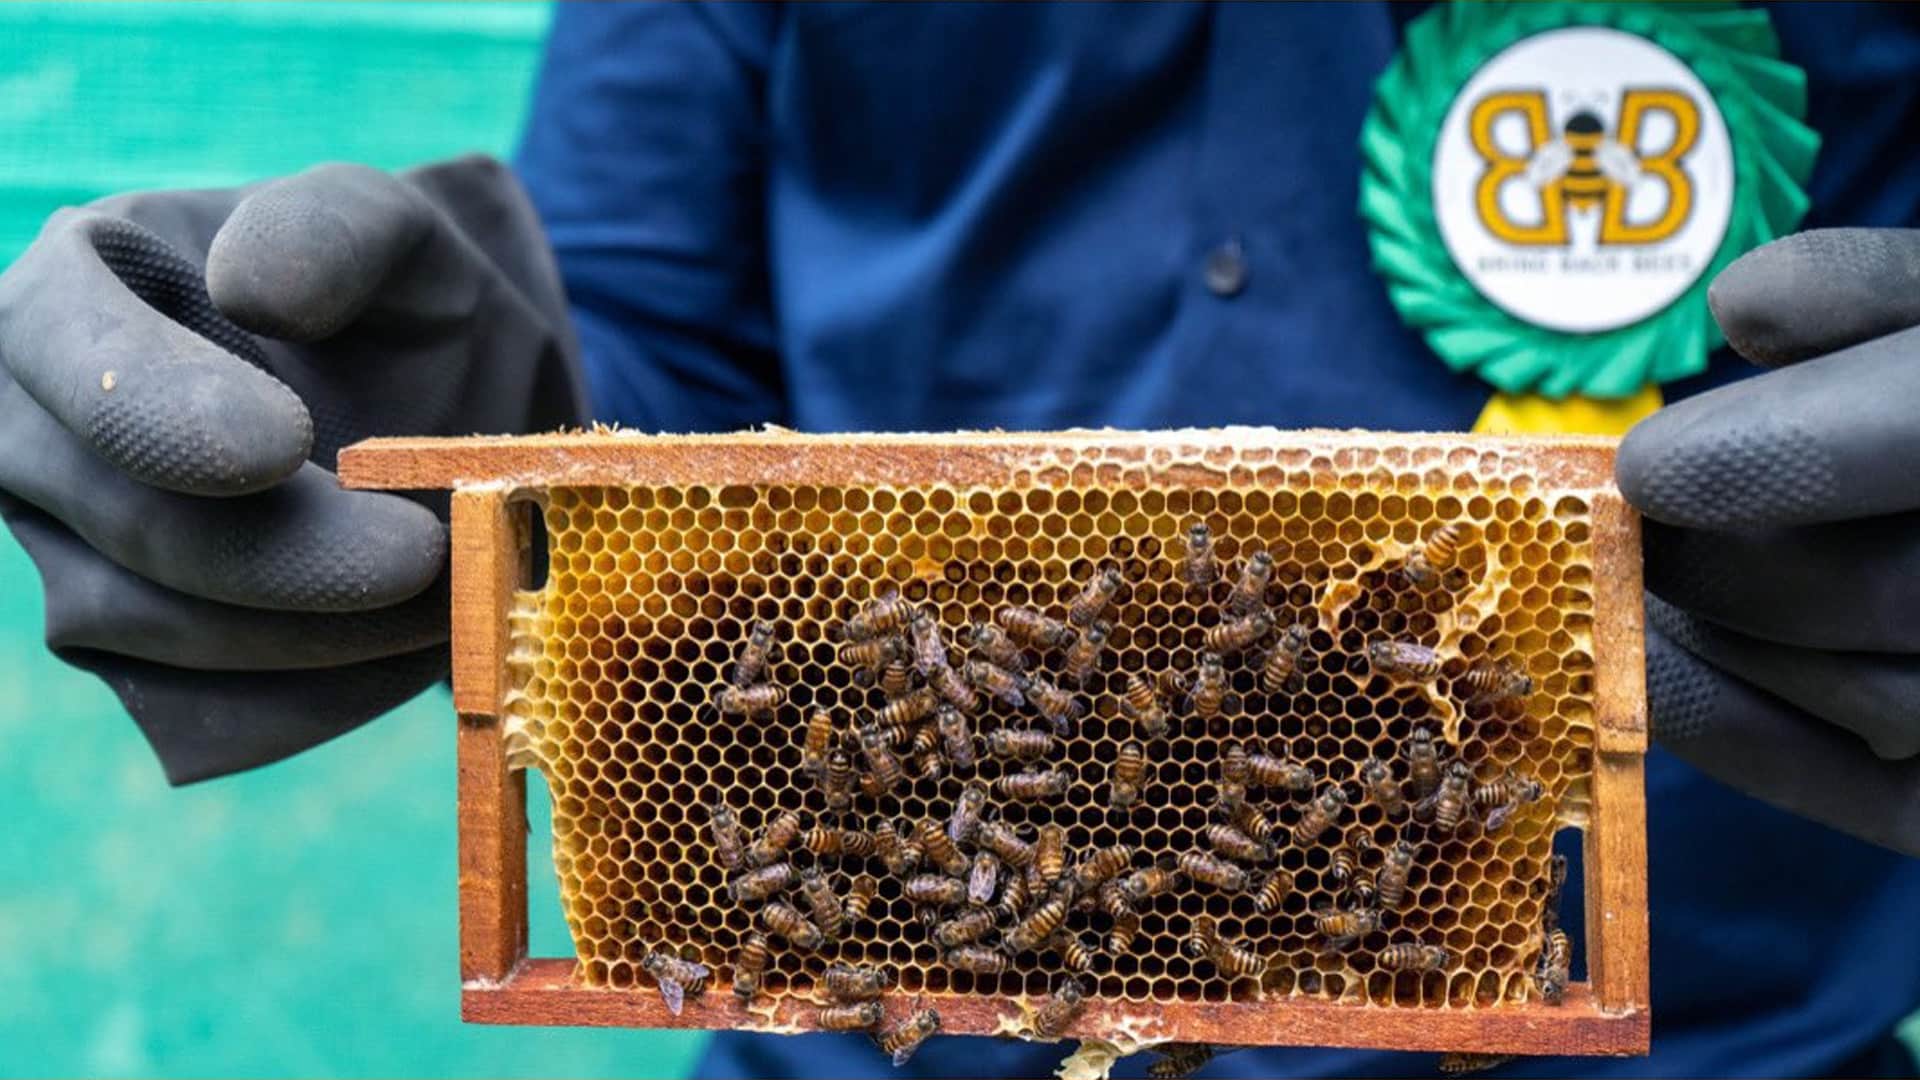 Bring Back Bees Project Sets up Apiary Units Selling NFT Digital Tokens